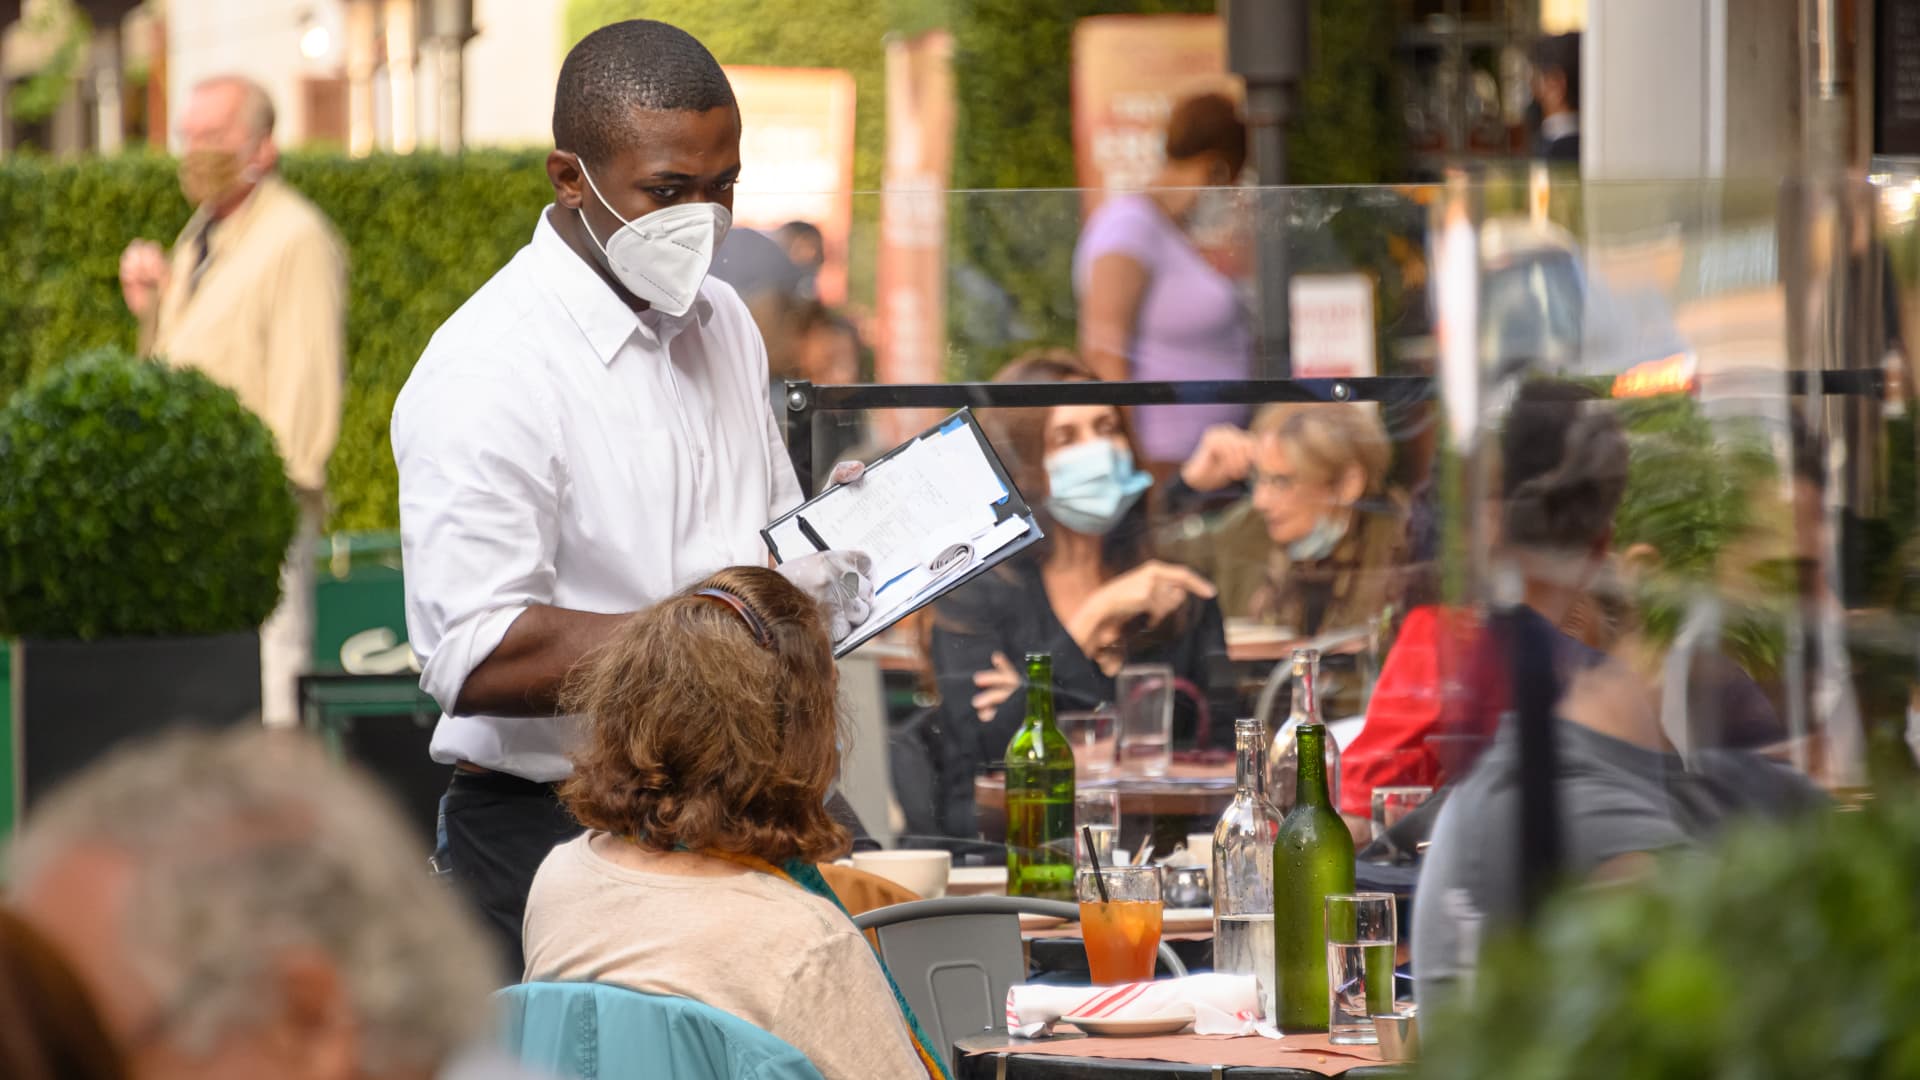 A waiter wears a face mask at a restaurant on the Upper West Side as the city continues the re-opening efforts following restrictions imposed to slow the spread of coronavirus on November 10, 2020 in New York City.